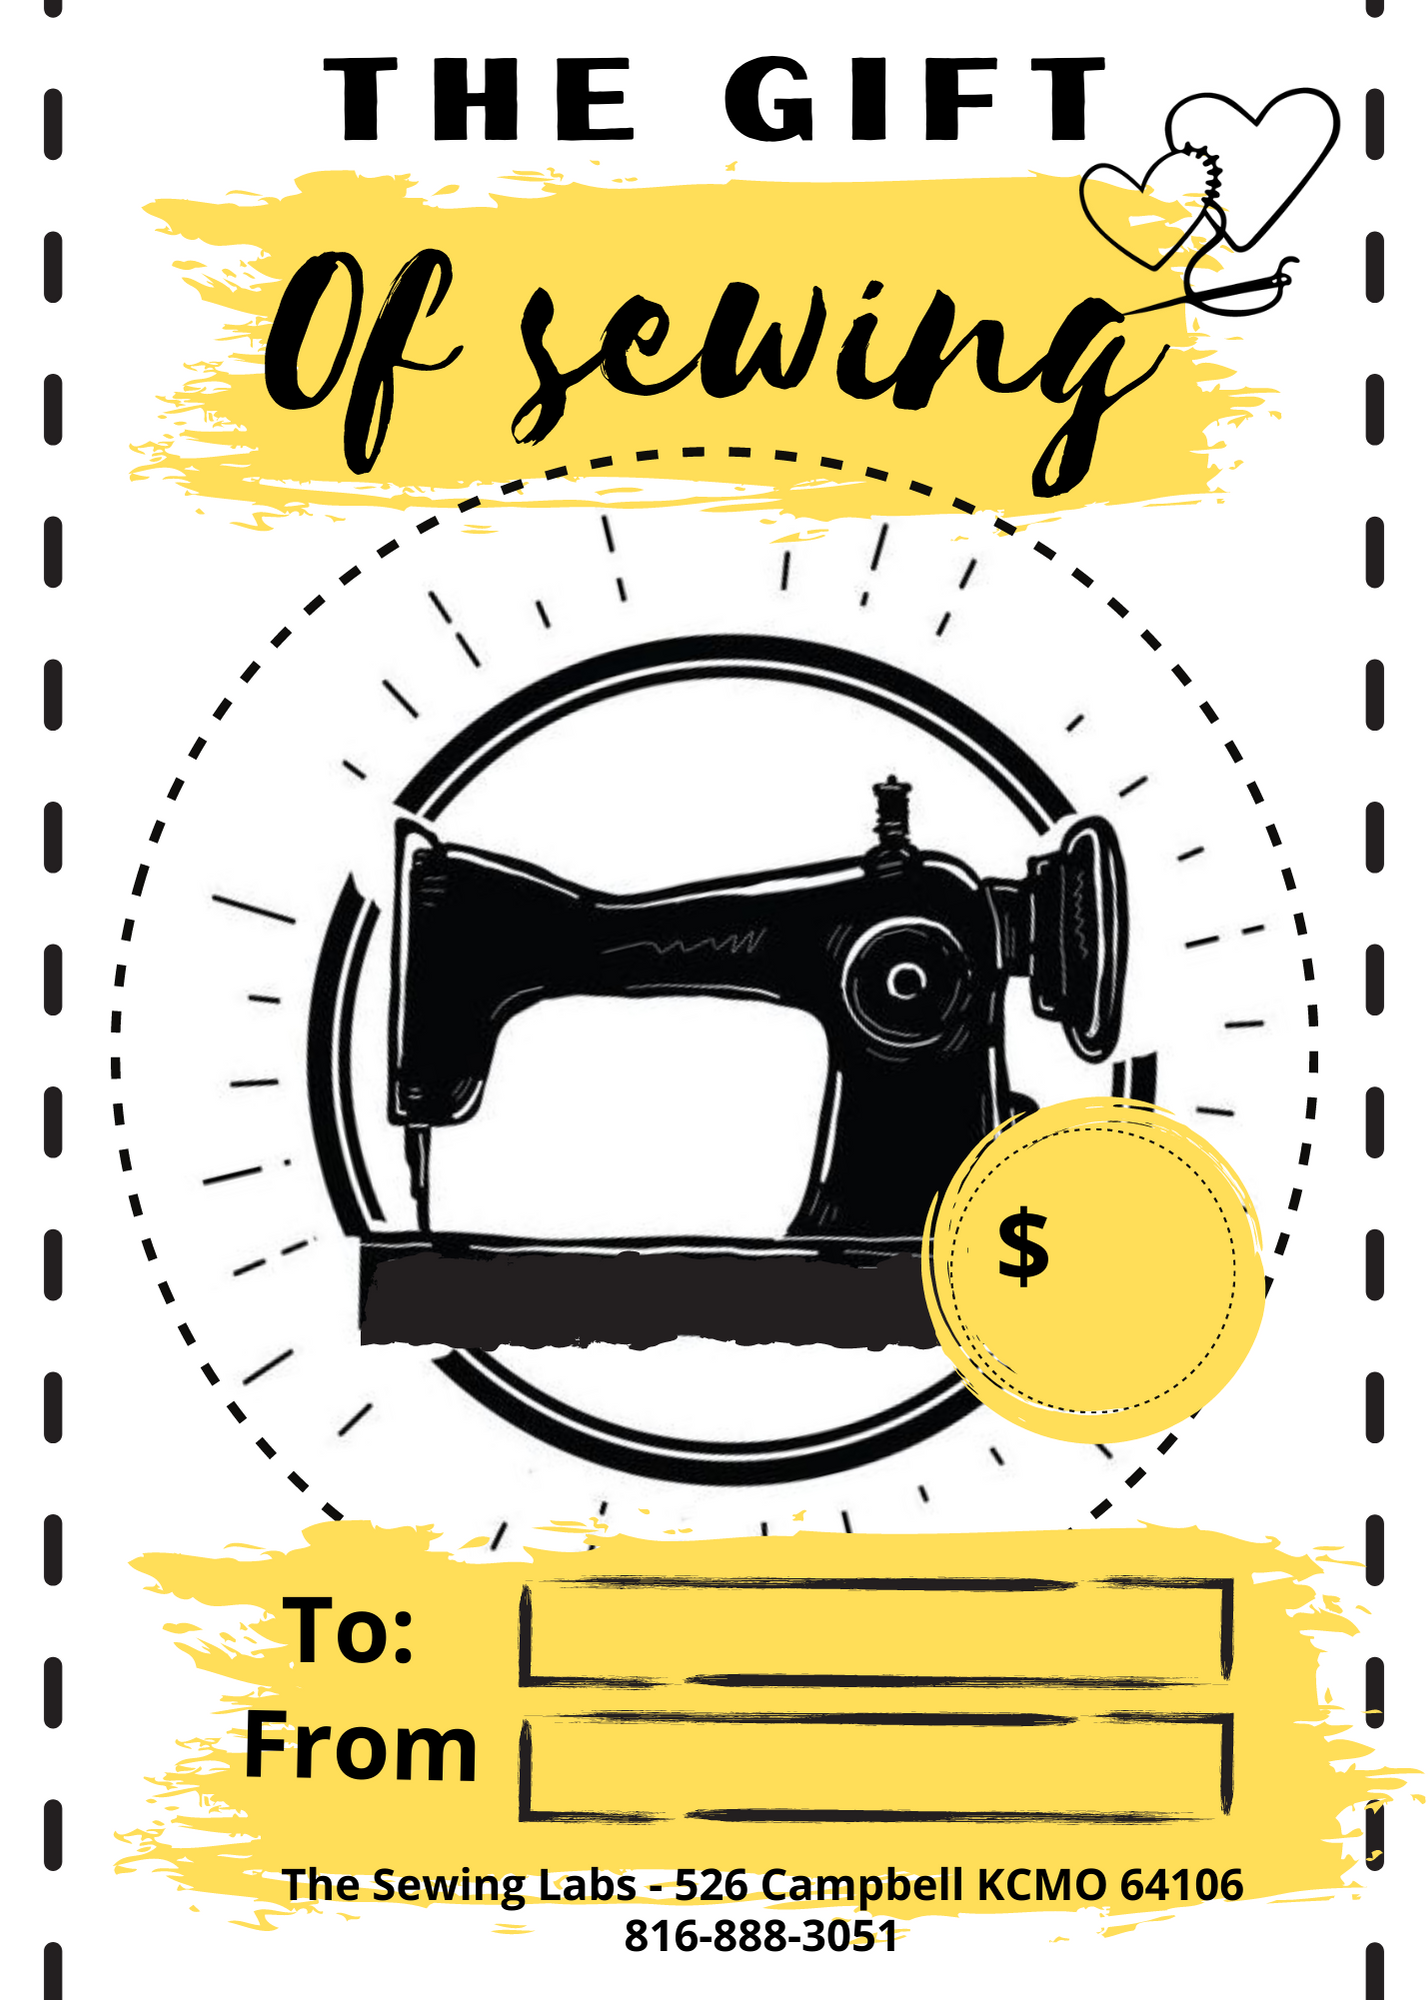 The Gift of Sewing - Gift Certificate - $200